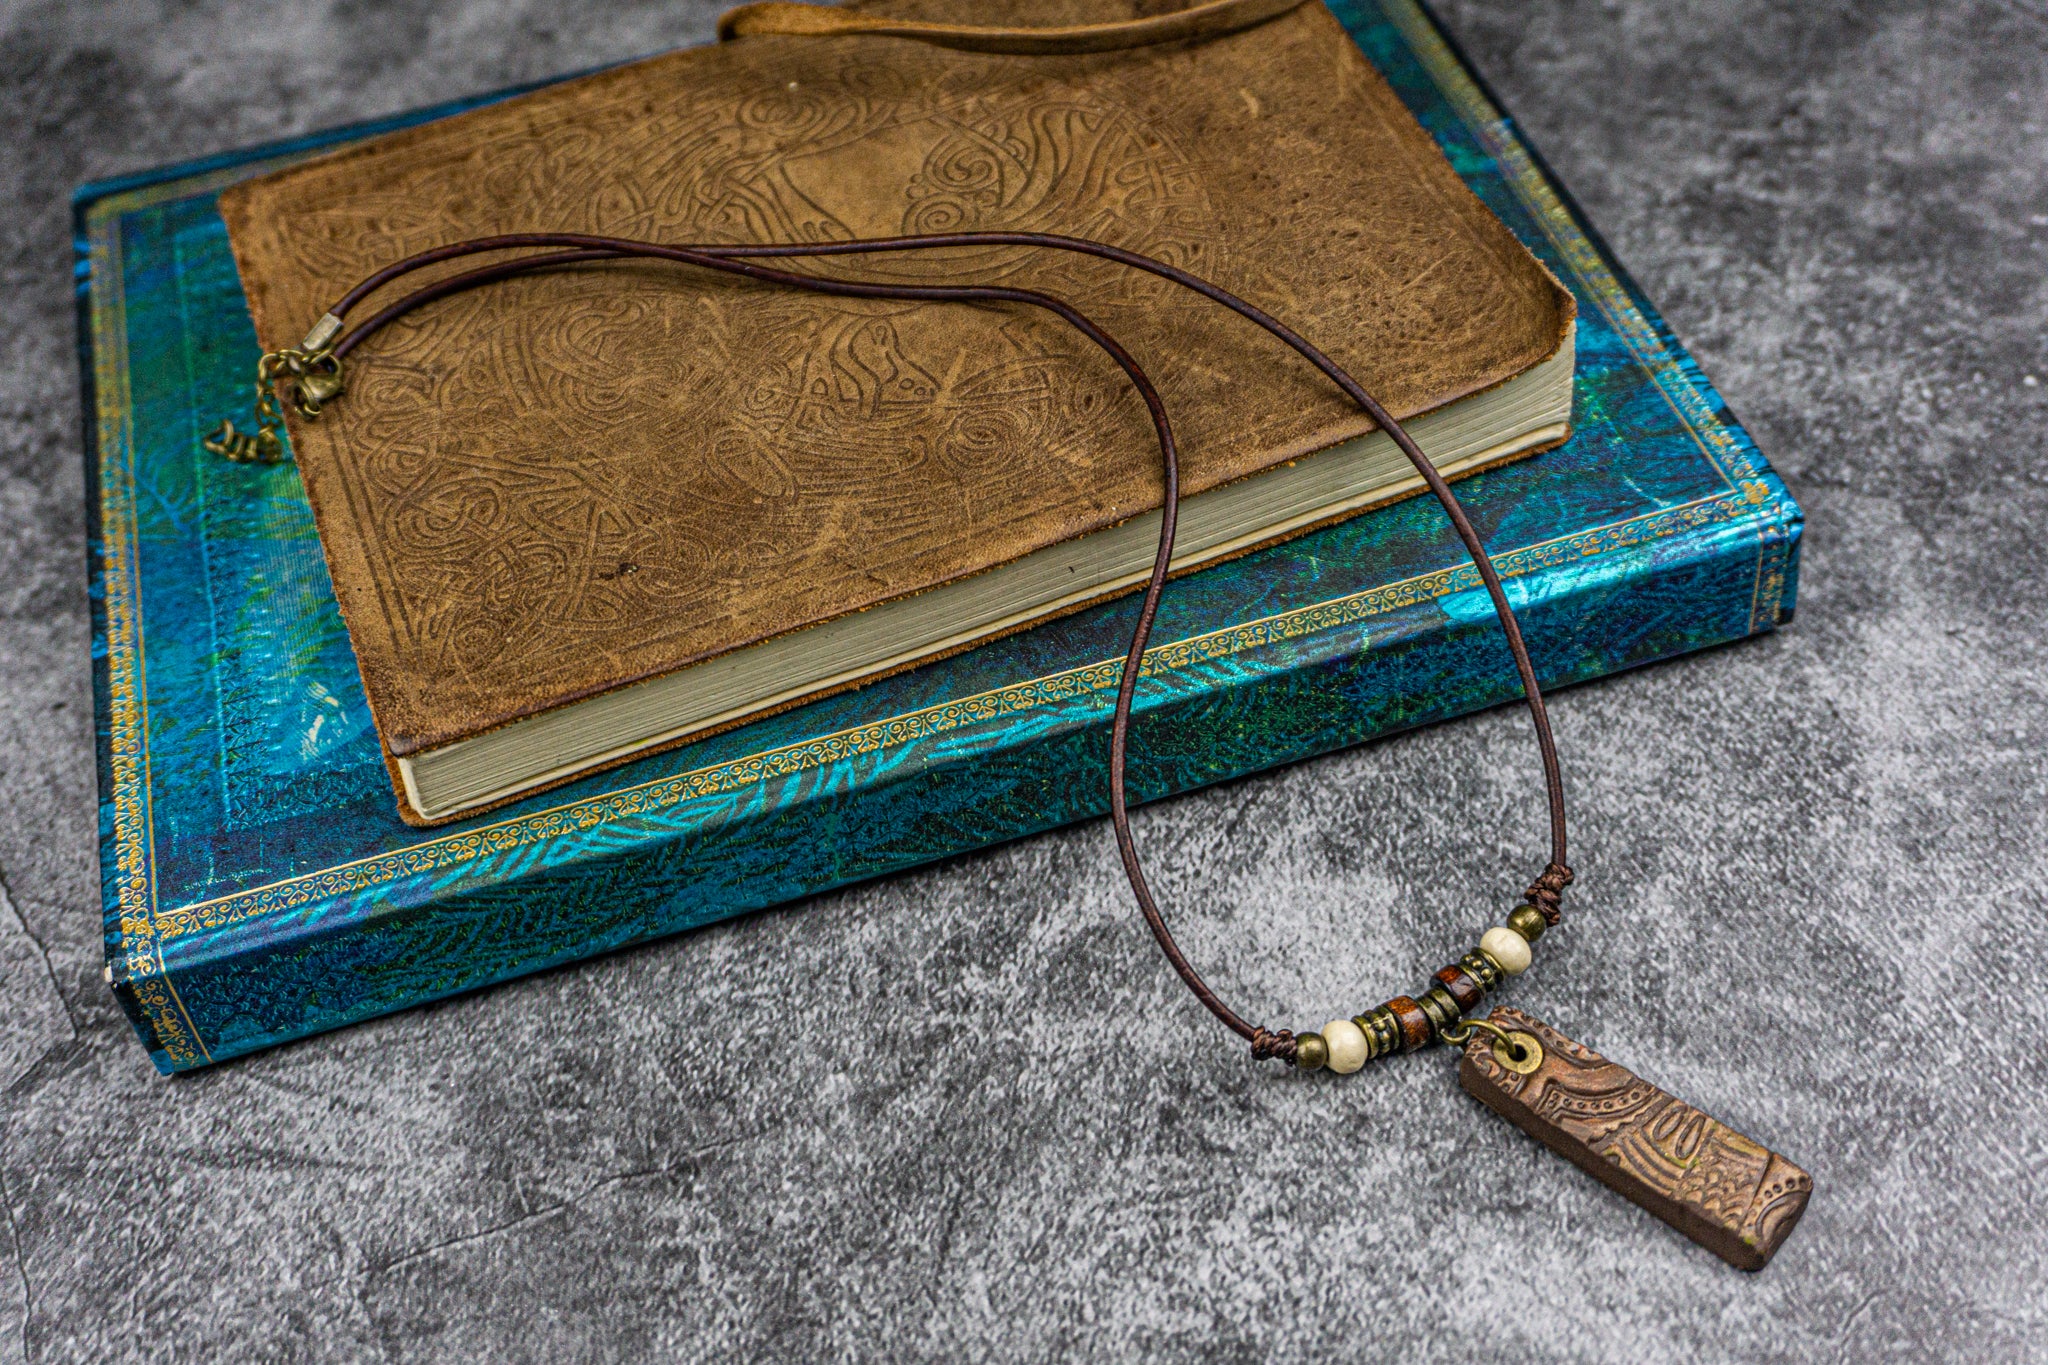 thin leather necklace with brass and wood details and a cool pendant